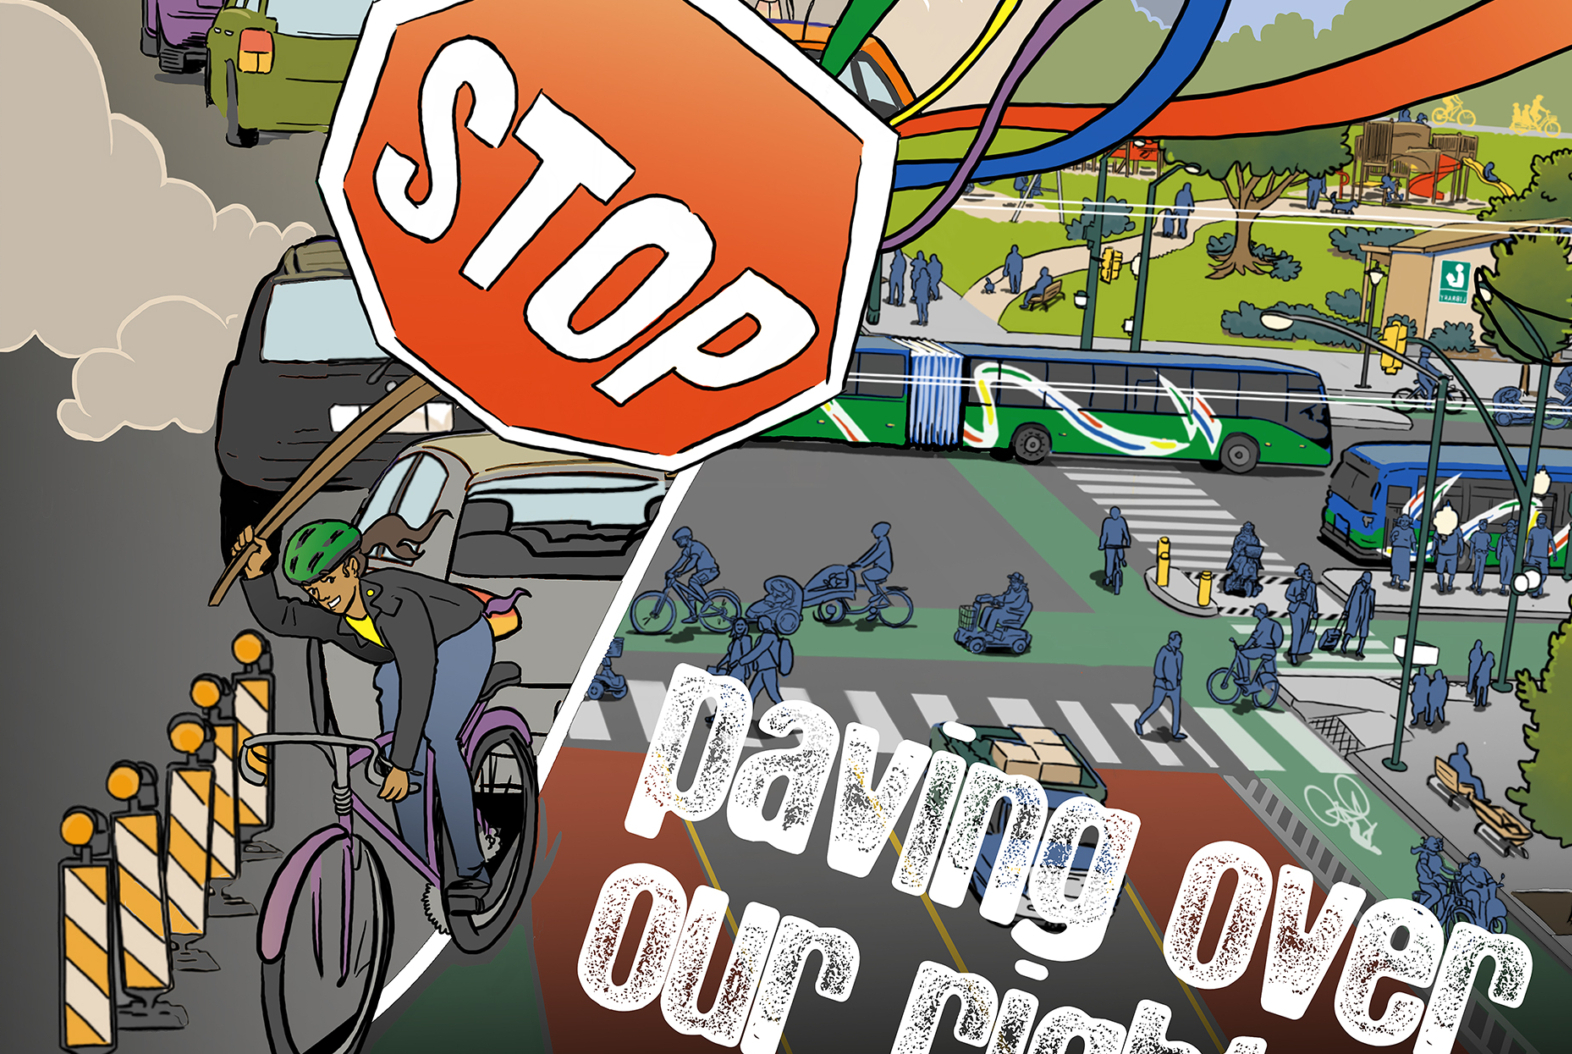 Comic cover art showing stop sign and car traffic